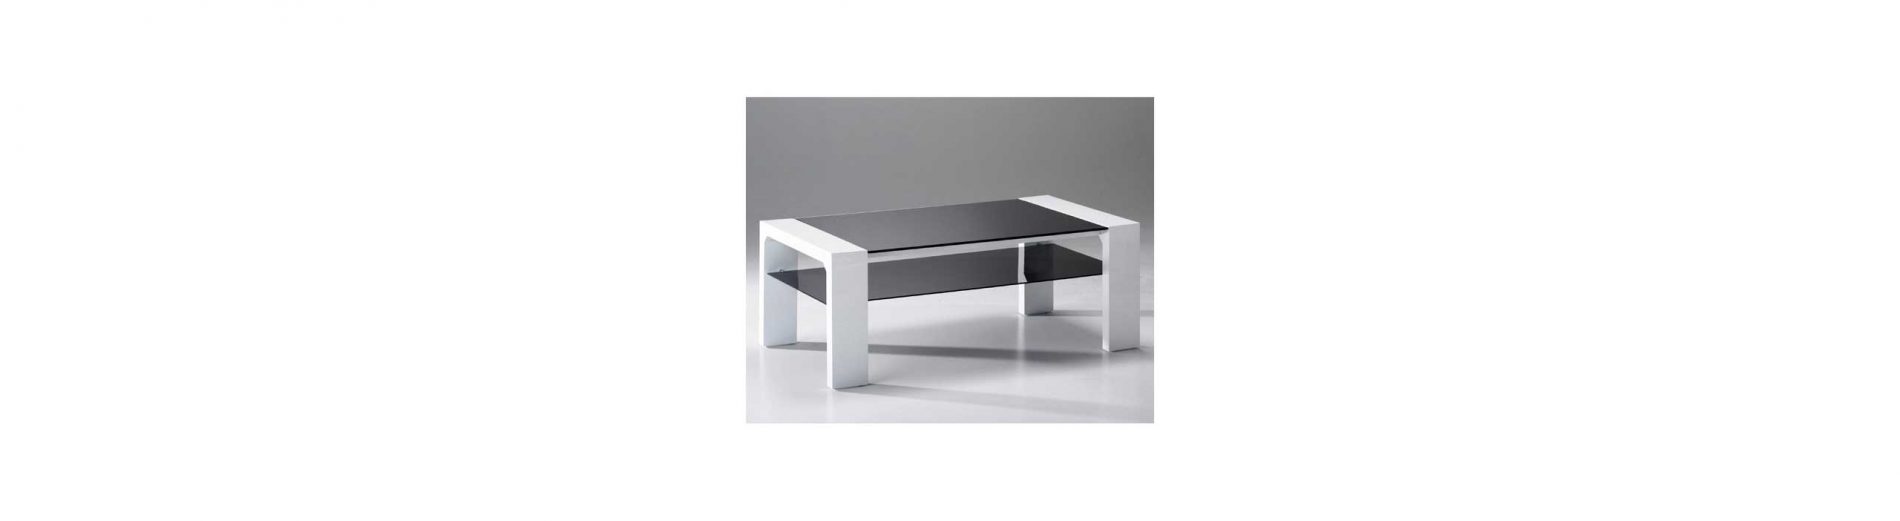 Modern Low Coffee Tables You’ll Fall In Love With And Tips To Make The Room Unique